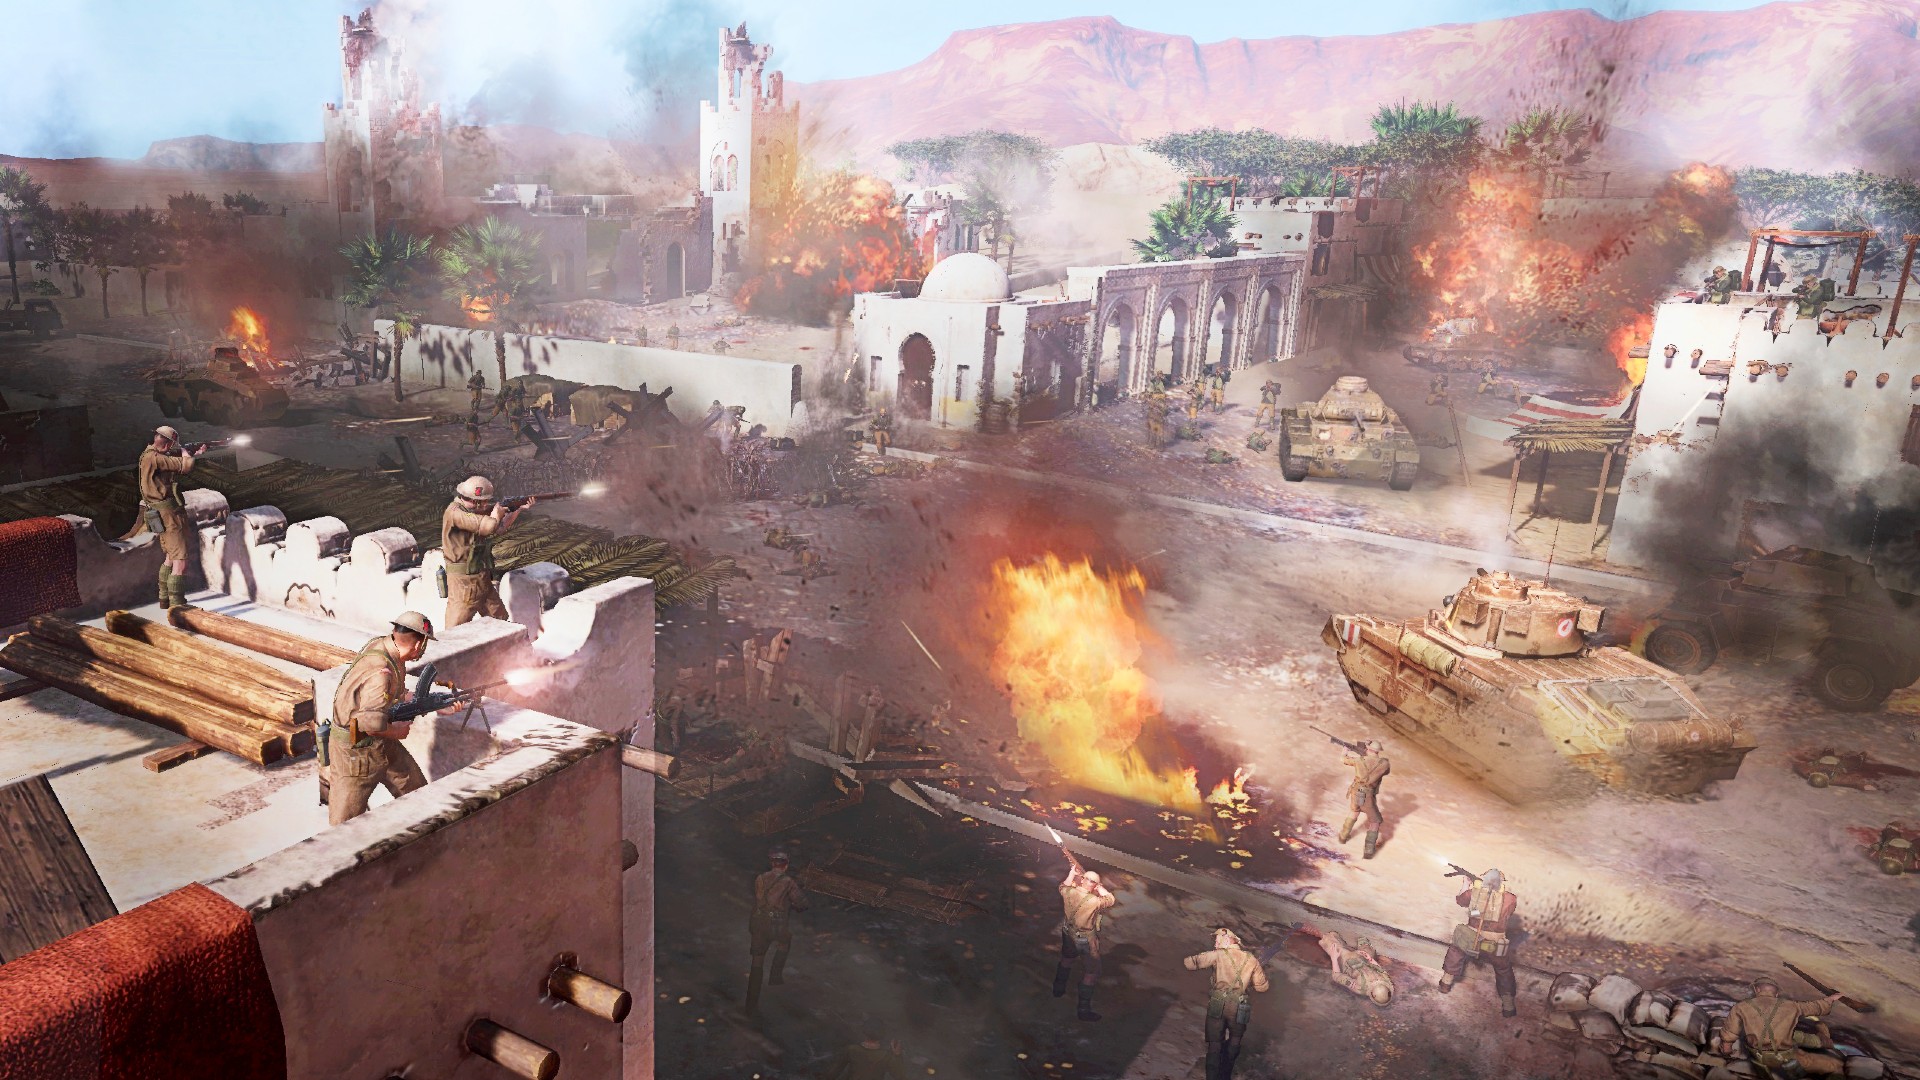 Company of Heroes 3 release date, pre-orders, and features